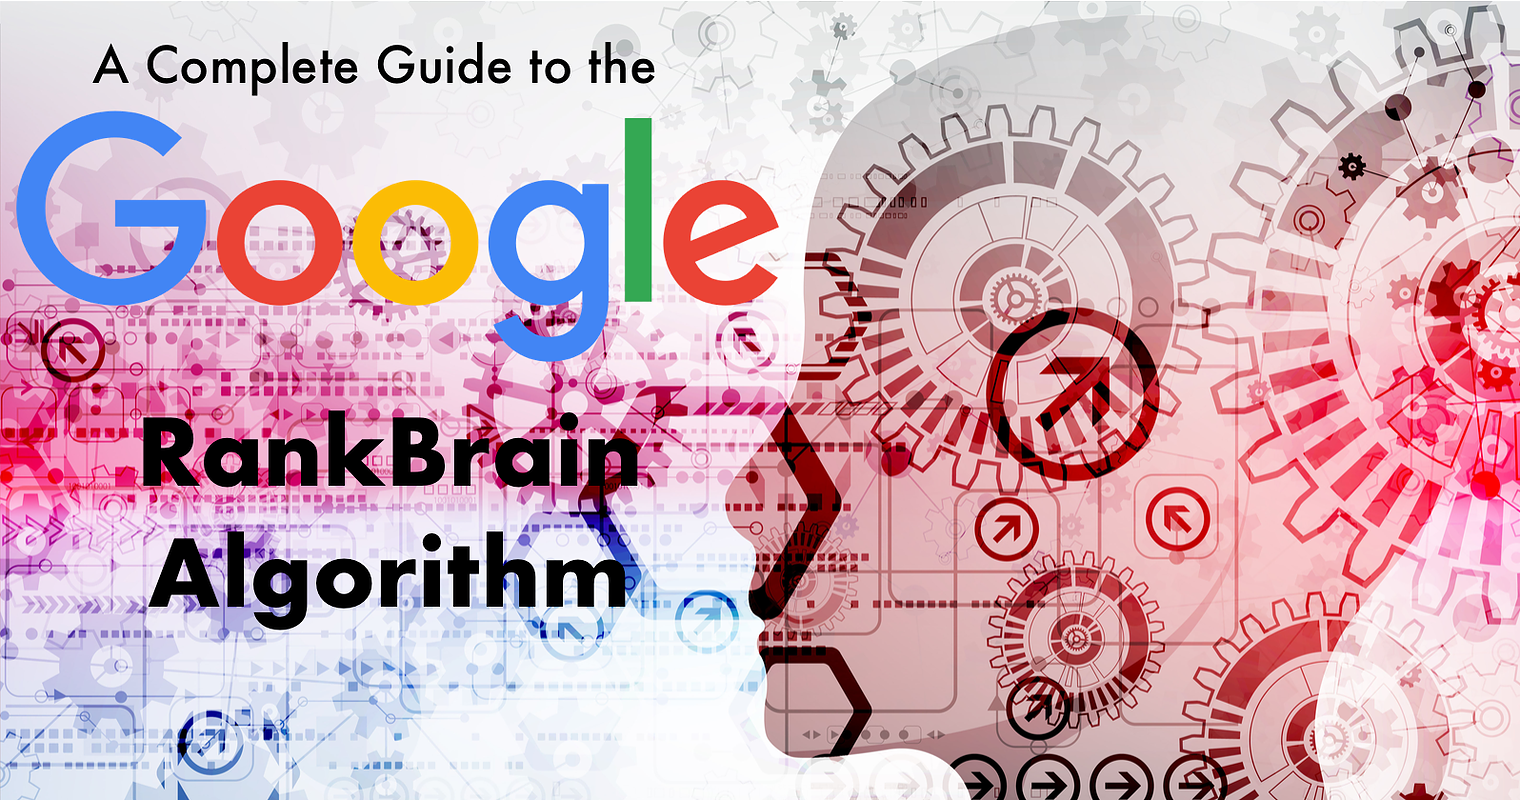 A Complete Guide to the Google RankBrain Algorithm